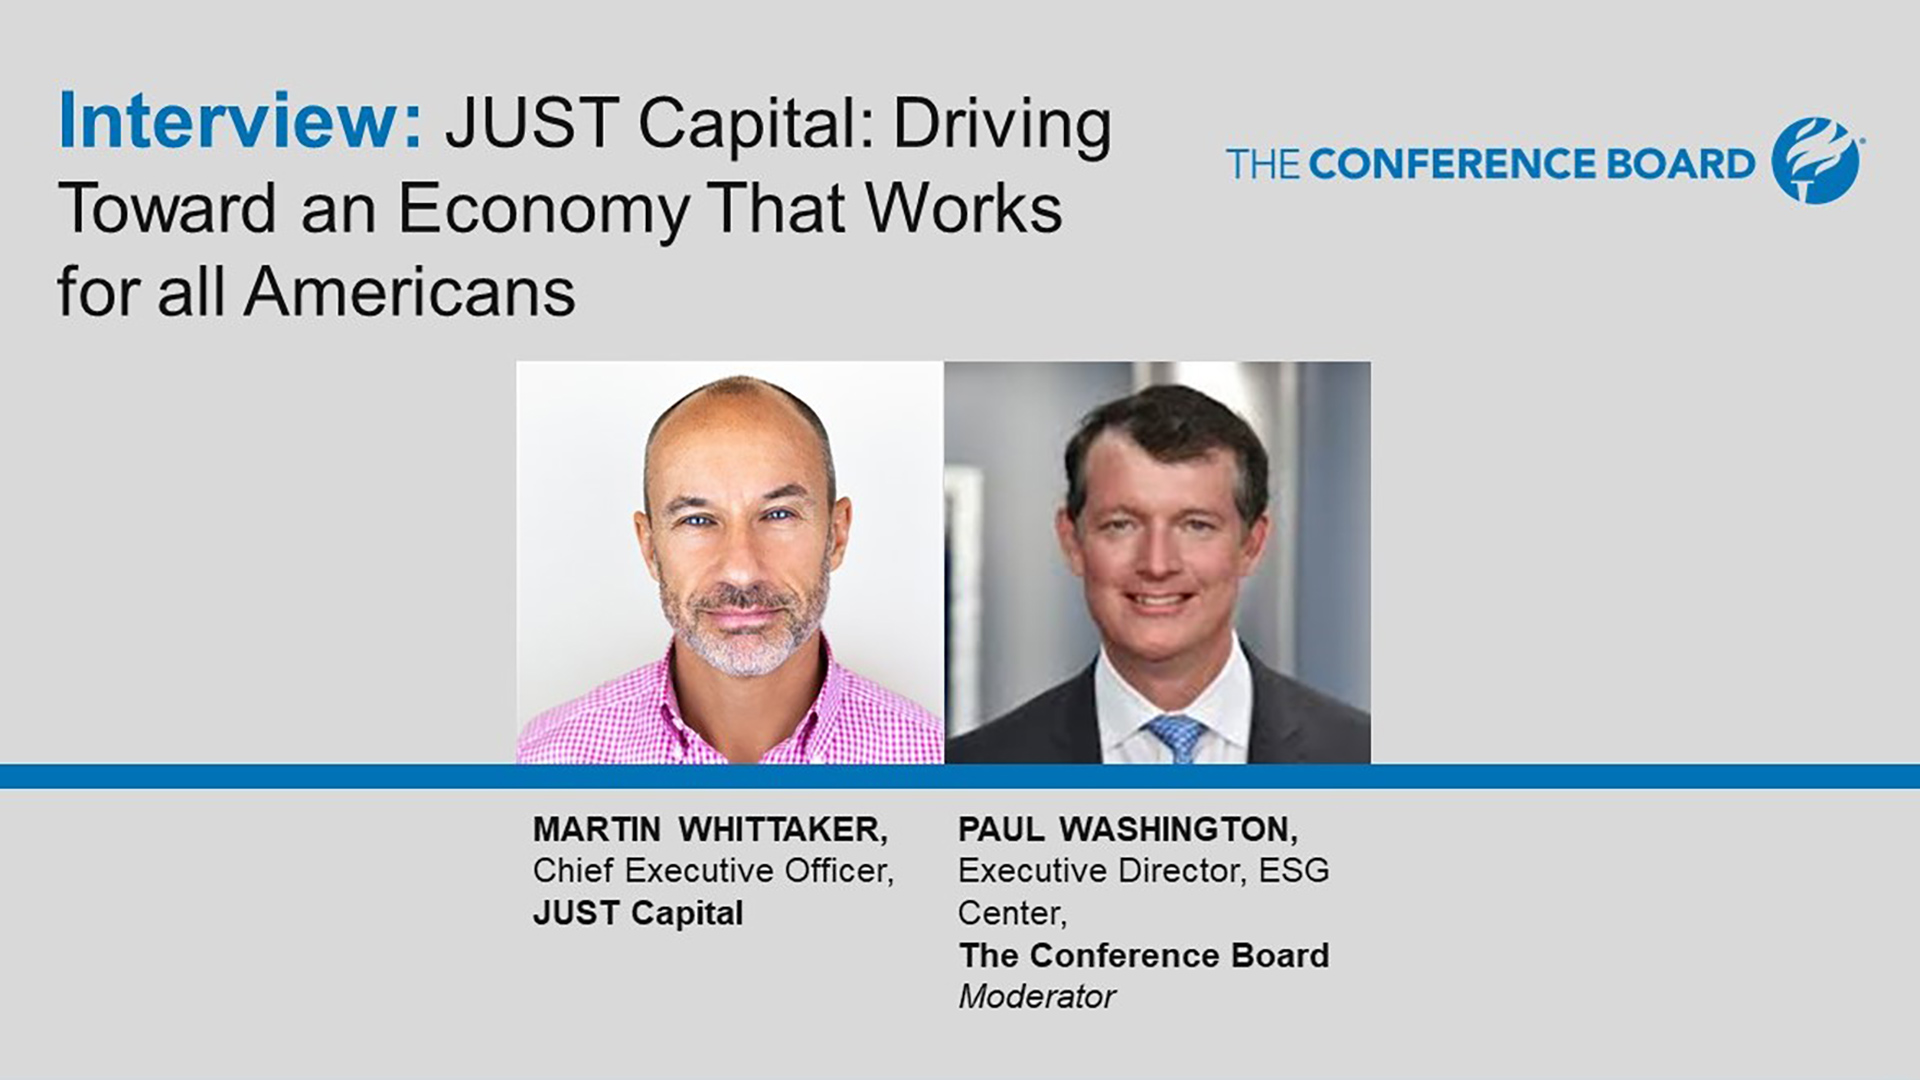 Building a More Civil & Just Society: Session M - JUST Capital: Driving Toward an Economy That Works for all Americans. 21 Mins